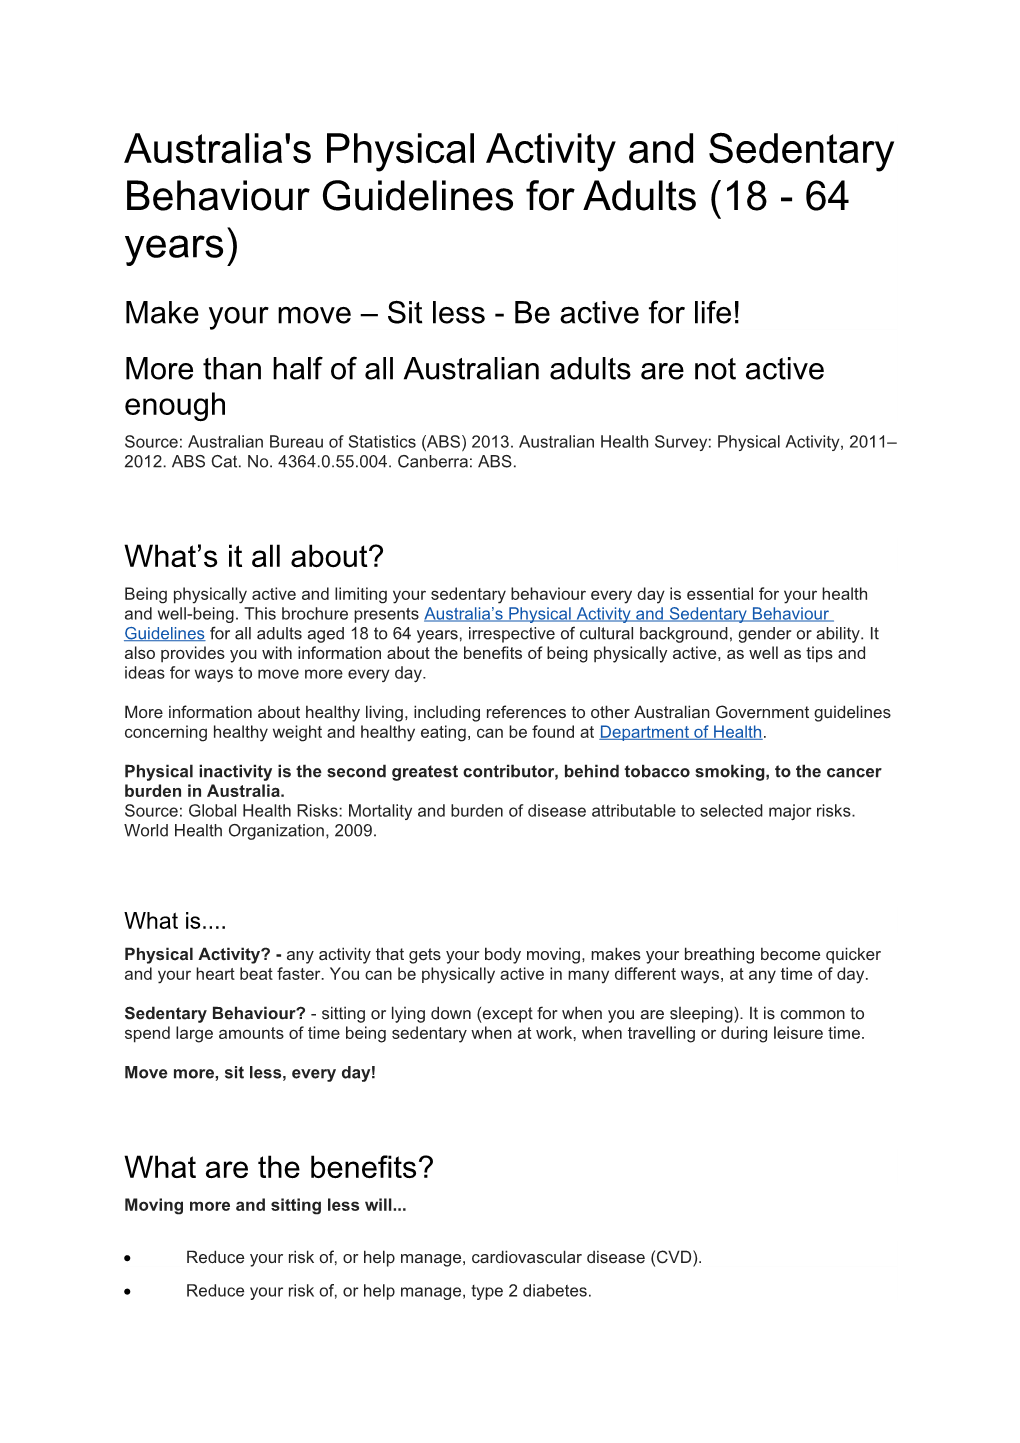 Australia's Physical Activity and Sedentary Behaviour Guidelines for Adults (18 - 64 Years)